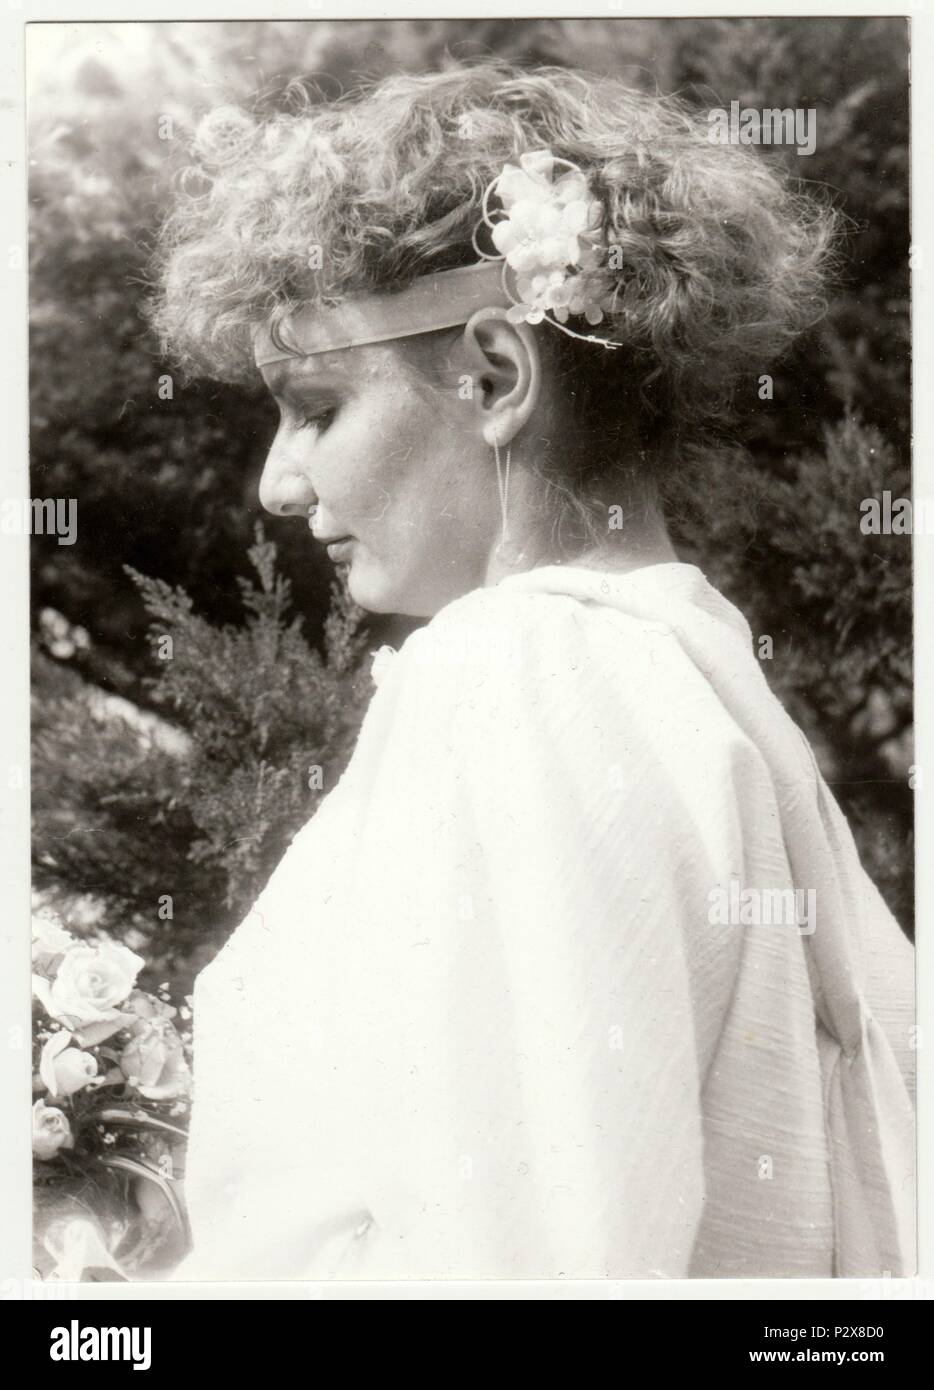 THE CZECHOSLOVAK SOCIALIST REPUBLIC - CIRCA 1980s: Vintage photo shows young woman with flowers in hair. Retro black & white  photography. Stock Photo